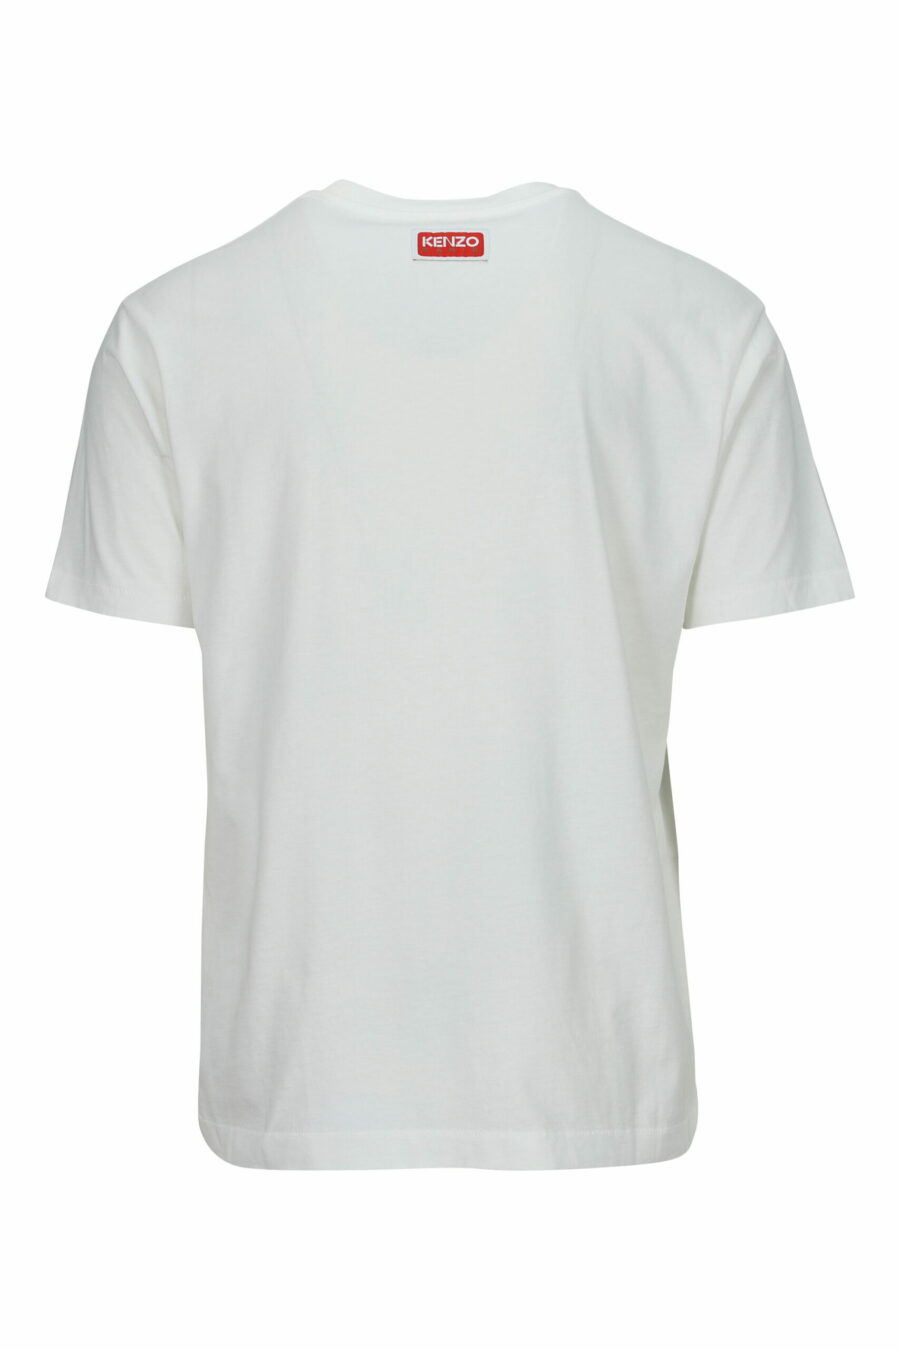 Oversize white T-shirt with large tiger embossed logo - 3612230568013 1 scaled